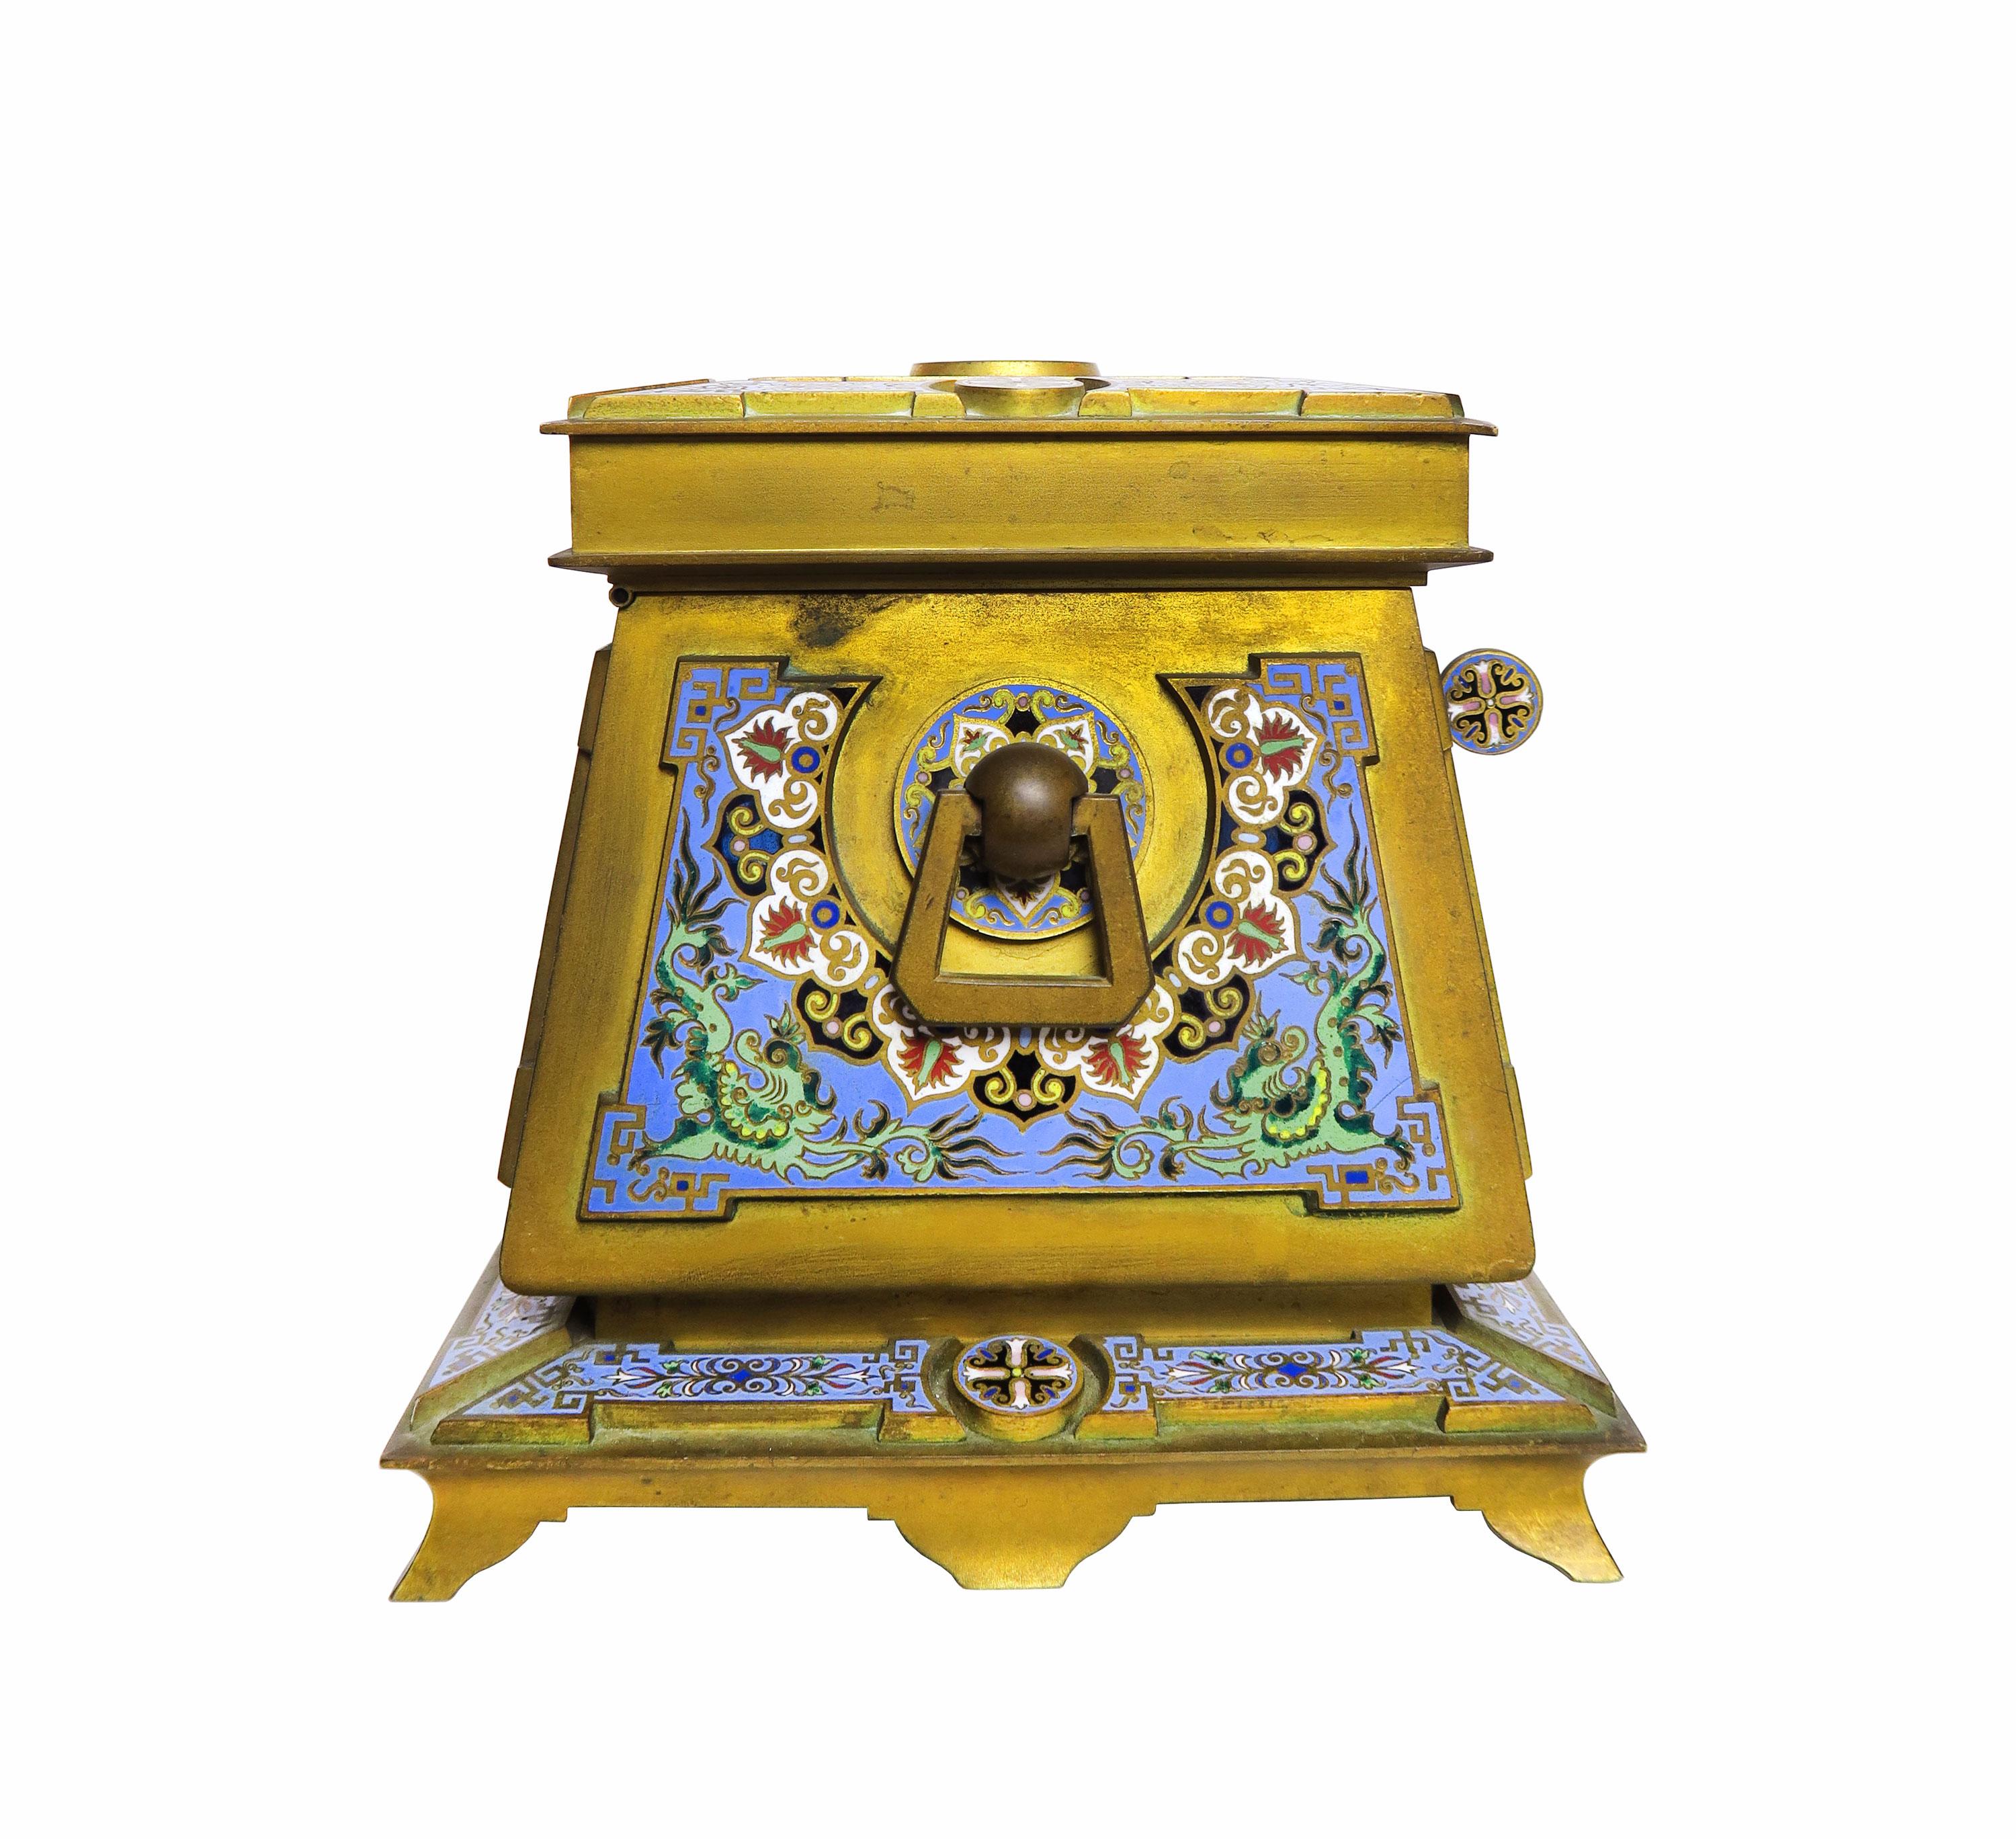 19th Century French Gilt-Bronze and Cloisonne Enamel Casket Possibly by Ferdinand Barbedienne